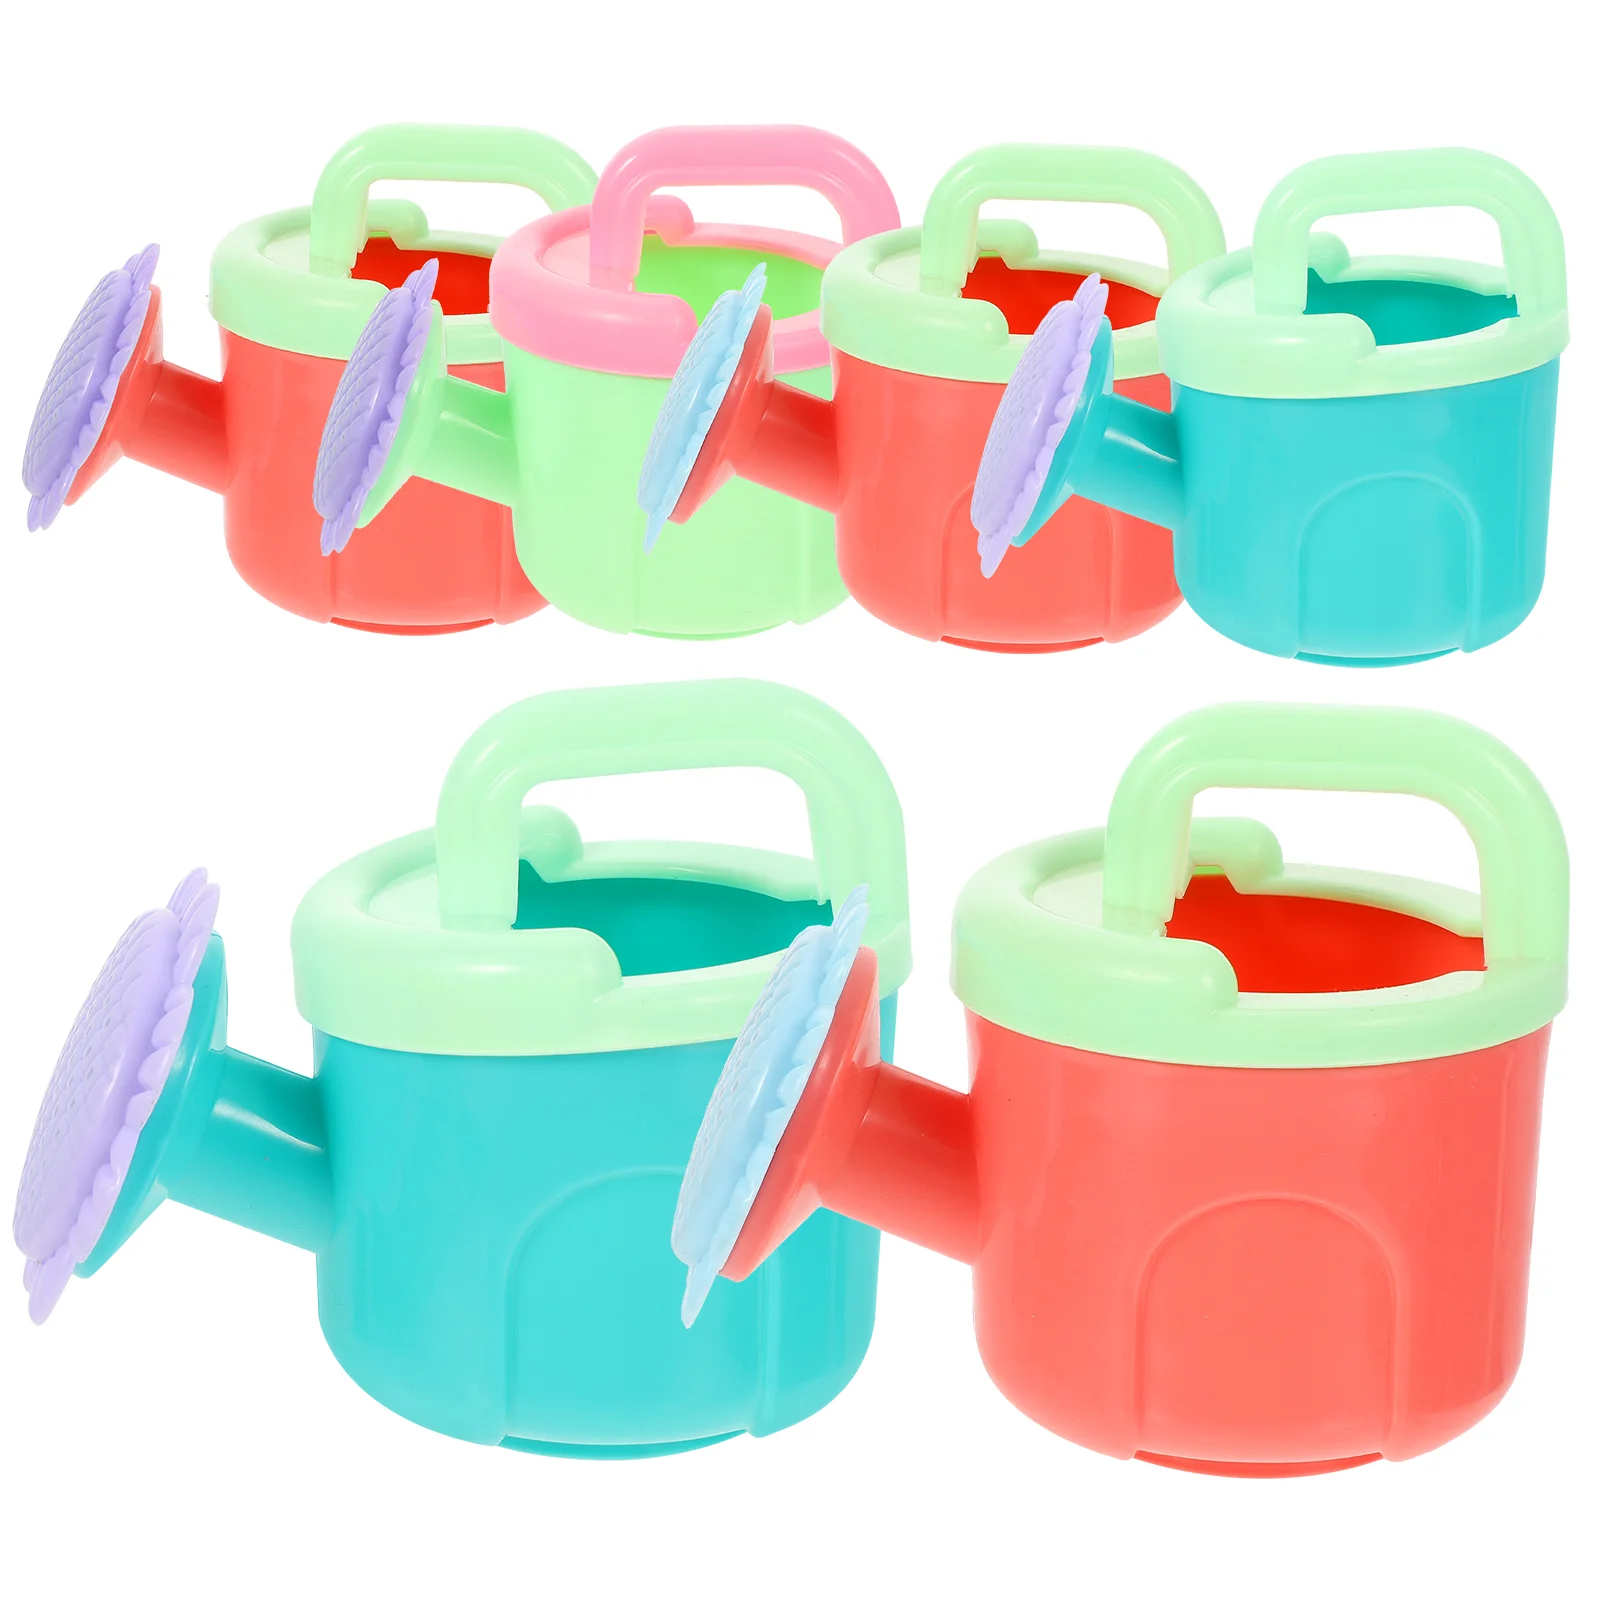 

Baby Watering Can Beach Pot Kids Holder Small Plastic Gardening Kettle Tool Spray Handle Spout Cans